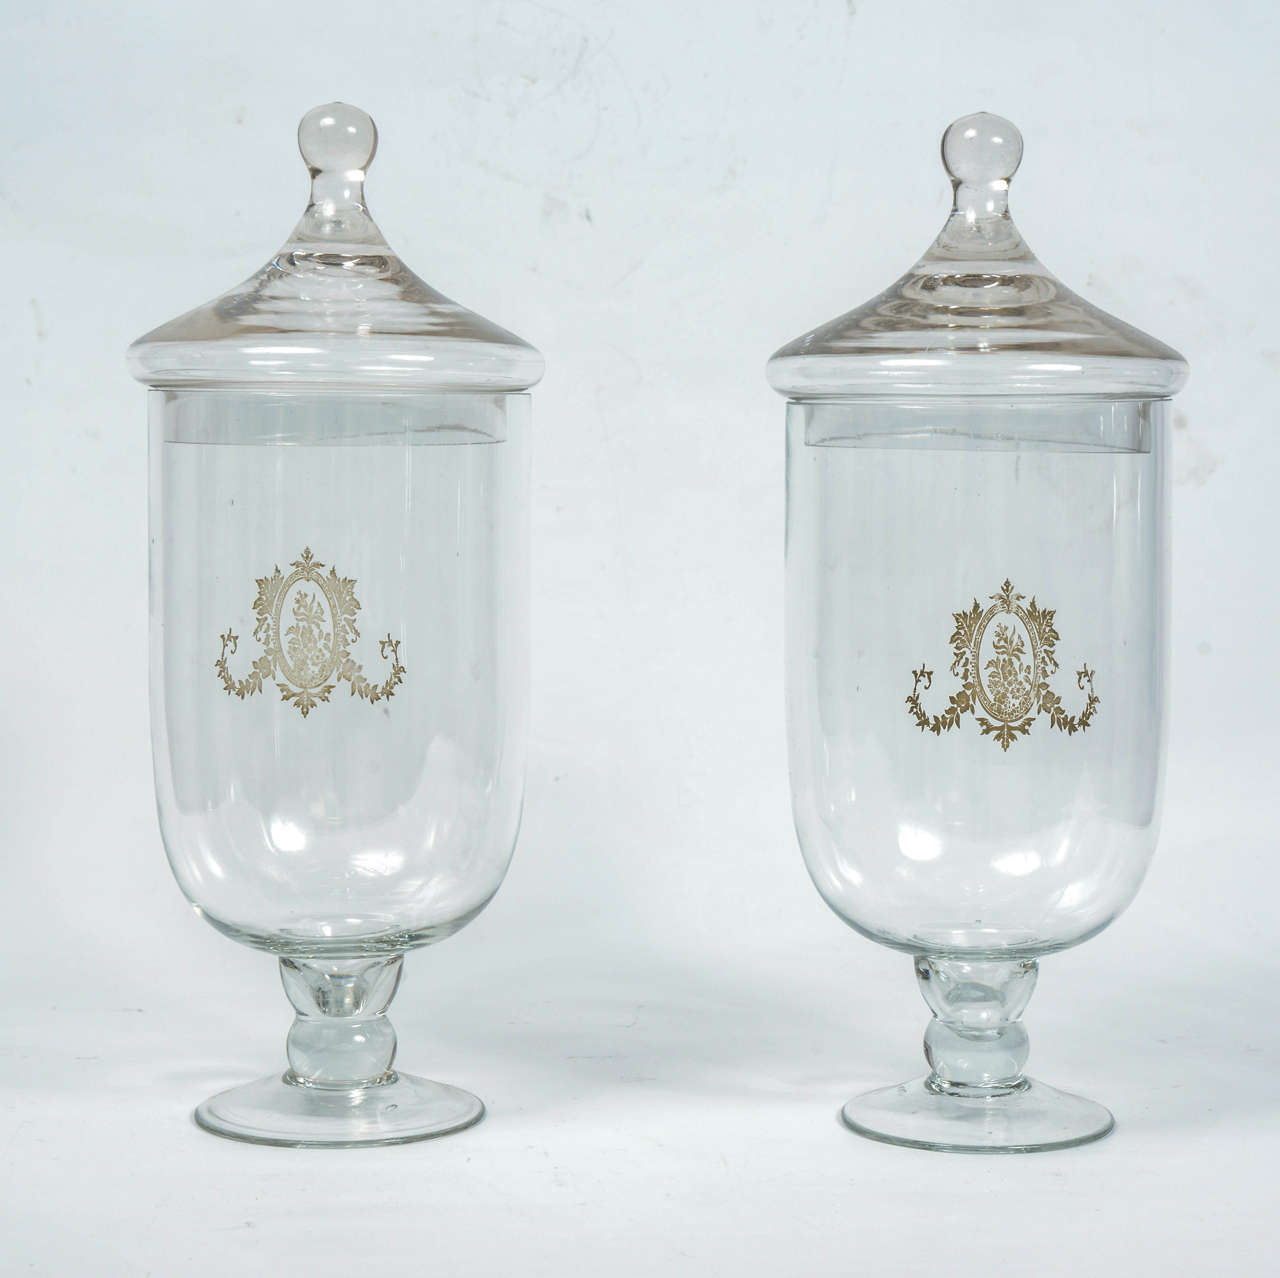 Pair of ornamental pots in glass.